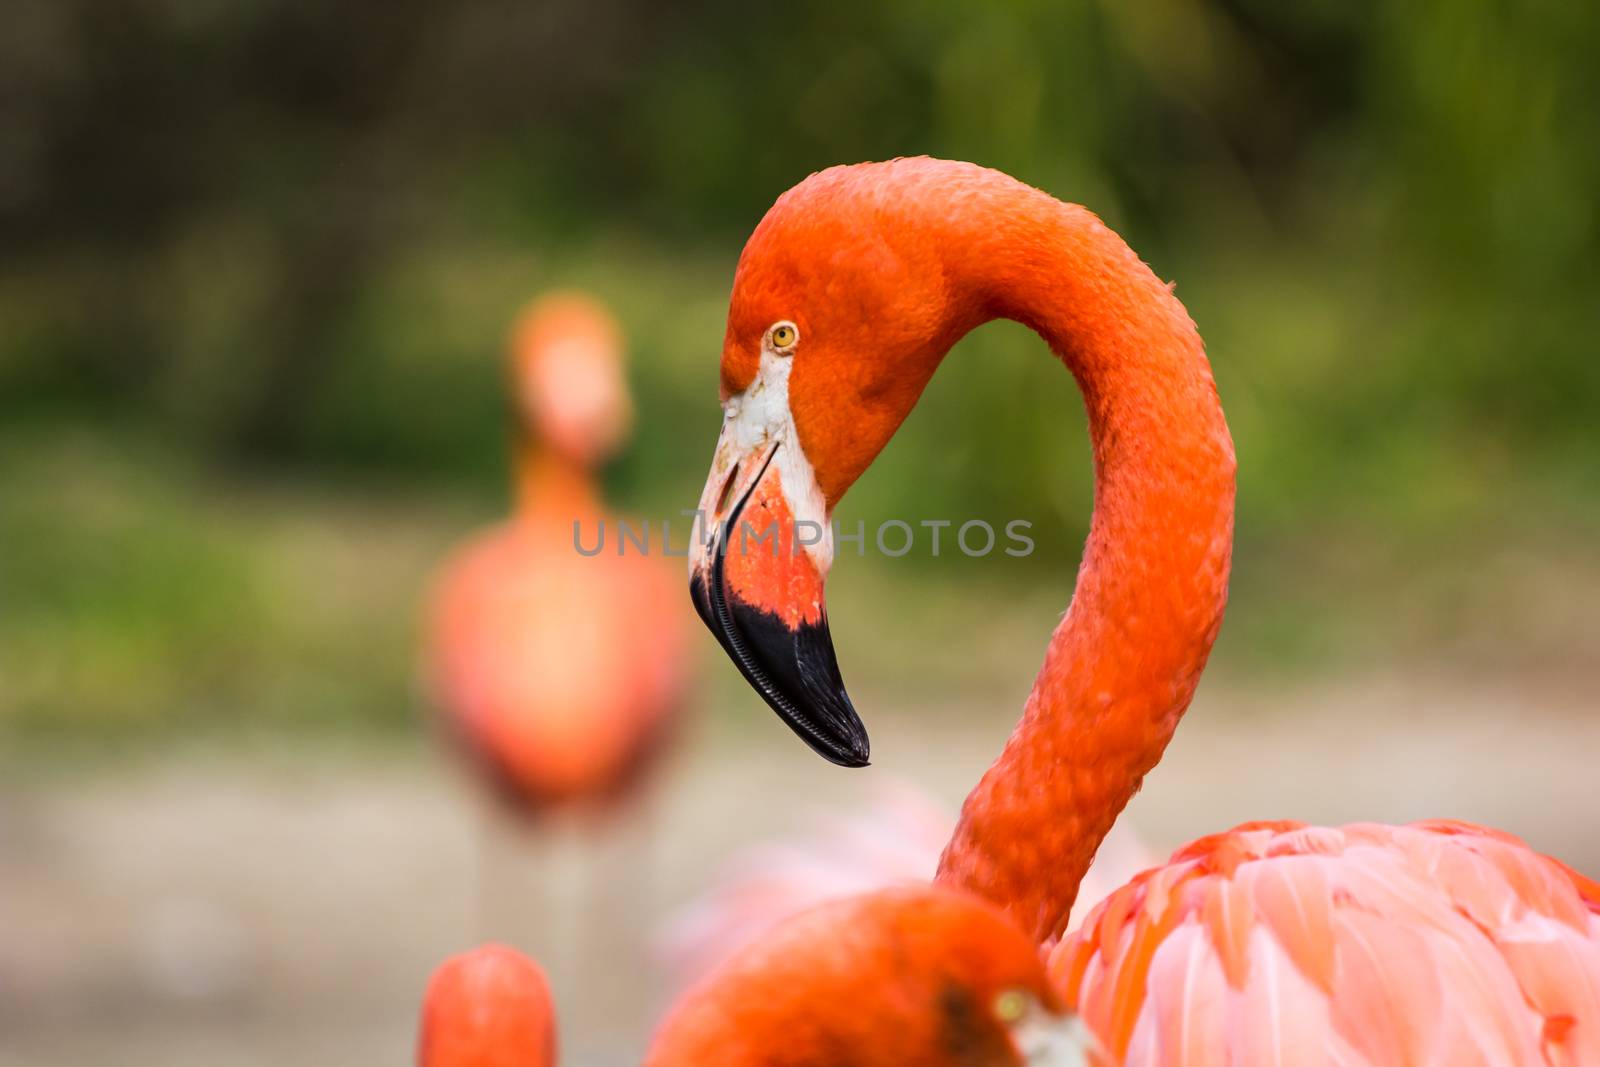 Flamingos or flamingoes are a type of wading bird in the family Phoenicopteridae. Red Flamingos come from America